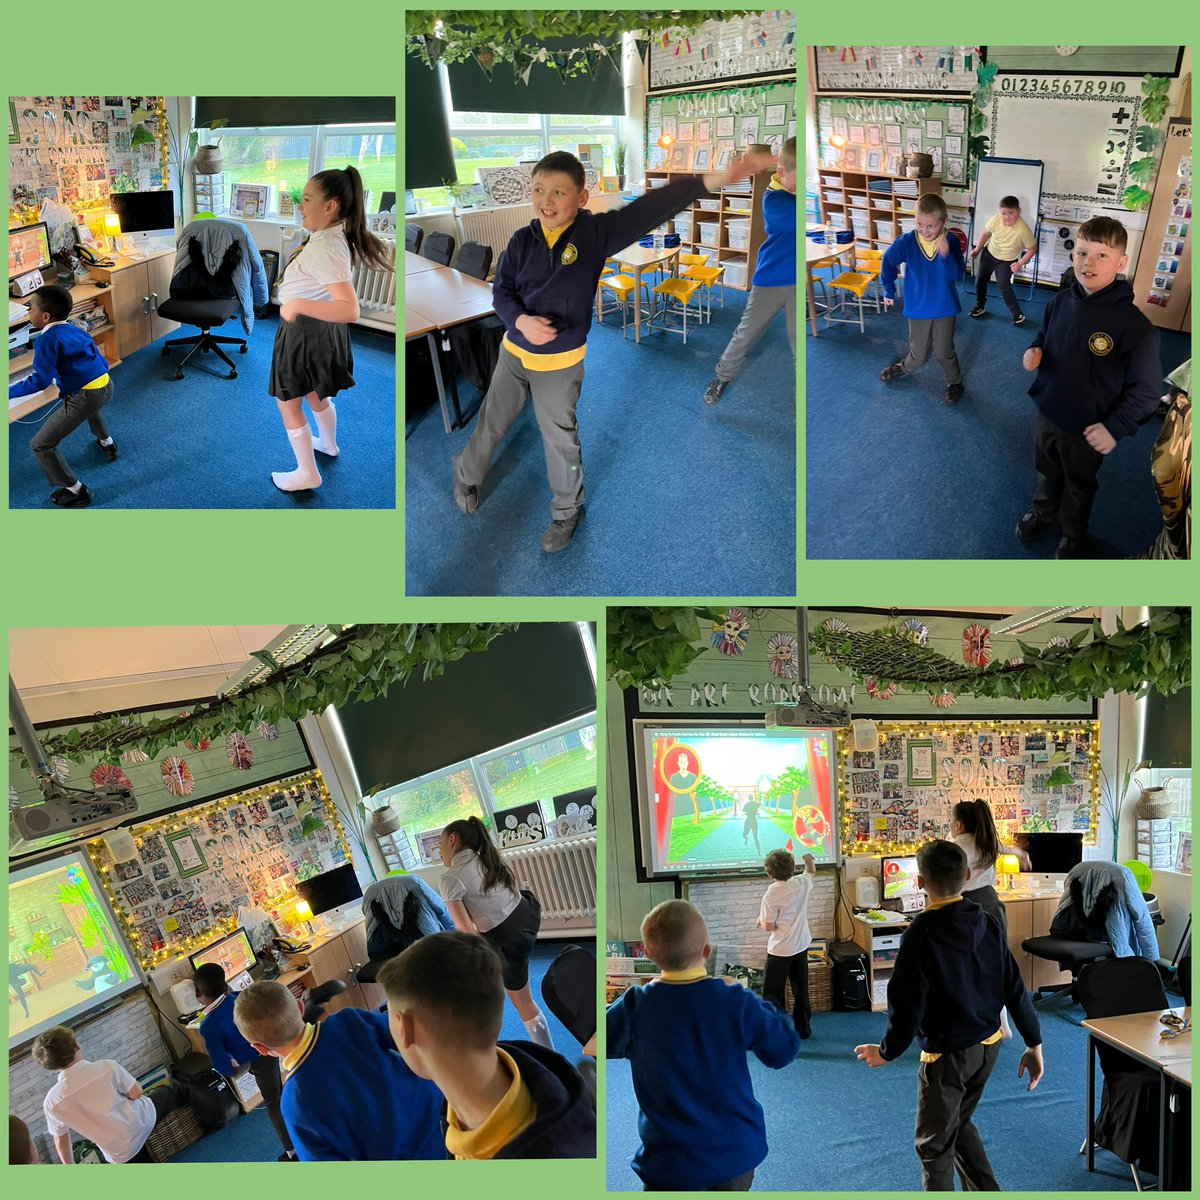 #Rainforest enjoyed some Kung Fu Panda exercise today 🐼 We had lots of fun and then calmed our mind and body with some meditation 🧘 #SEL #PE #SELModelSchool #PSHE @PATHSEdUK